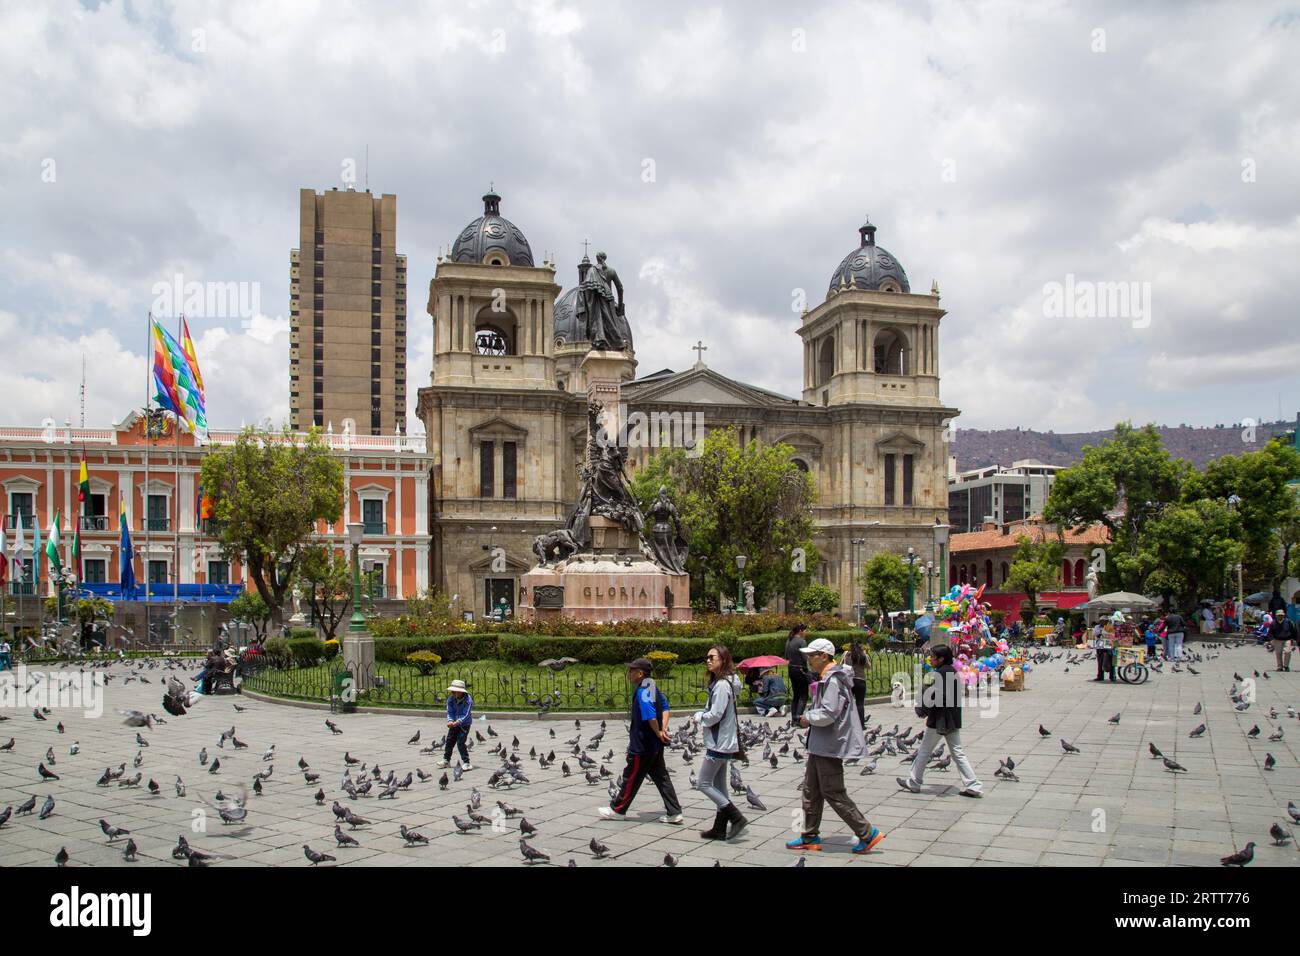 La Paz, Bolivia, October 24, 2015: People on Plaza Murillo with the cathedral in the background Stock Photo